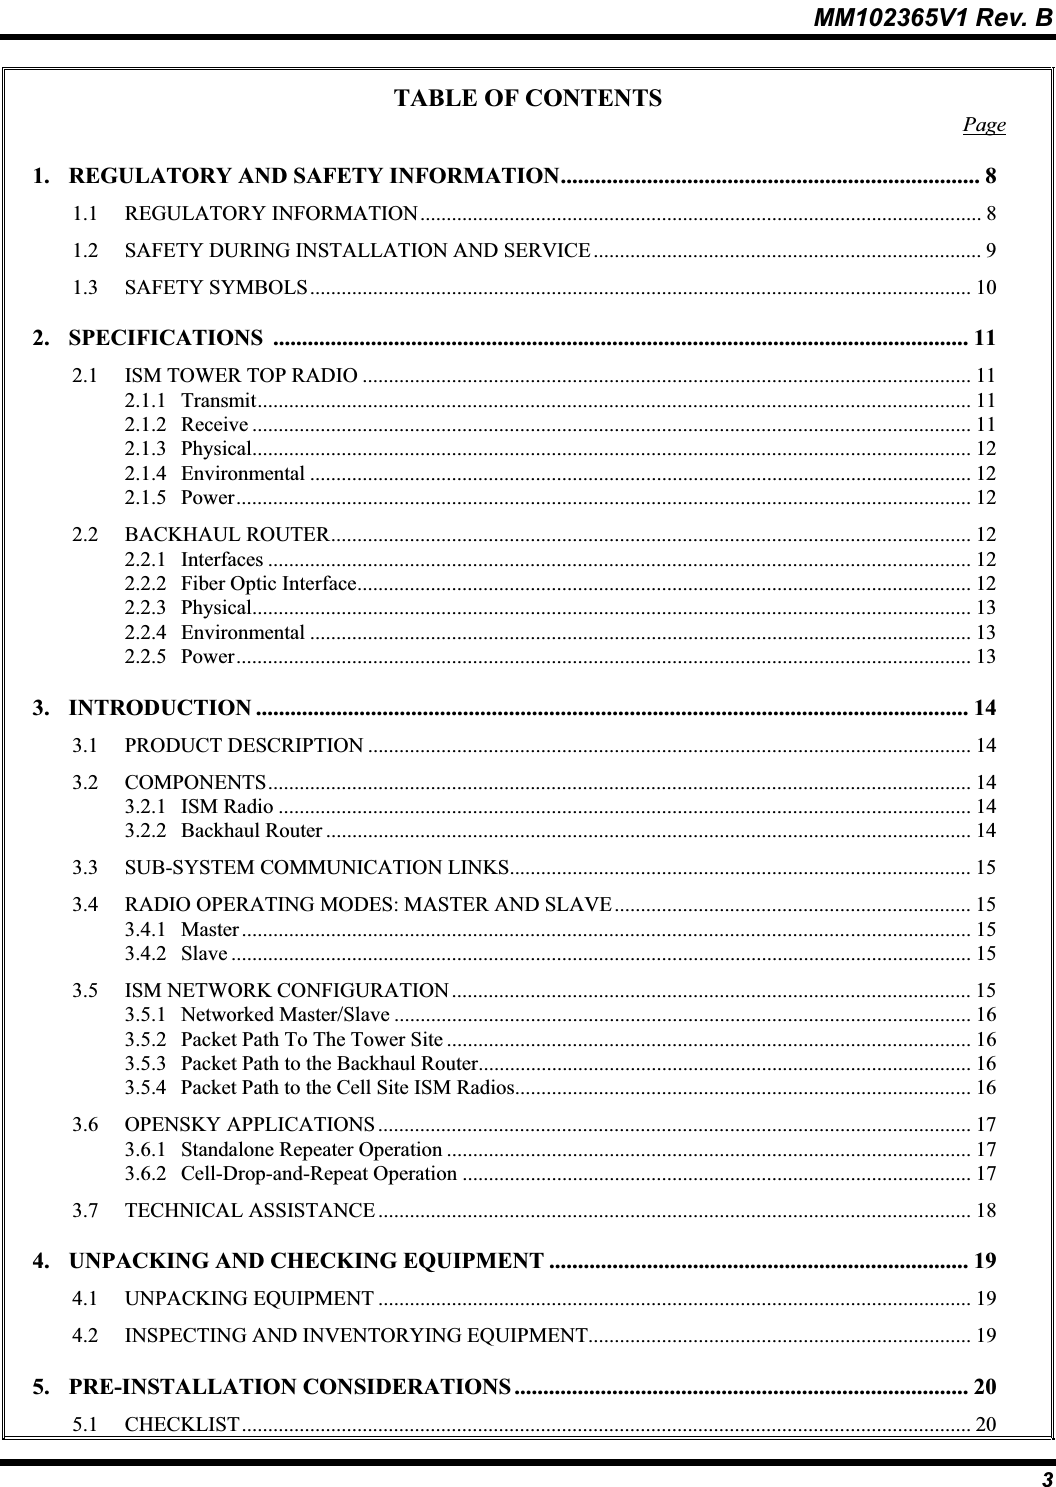 MM102365V1 Rev. B TABLE OF CONTENTS Page1. REGULATORY AND SAFETY INFORMATION......................................................................... 81.1 REGULATORY INFORMATION........................................................................................................... 81.2 SAFETY DURING INSTALLATION AND SERVICE.......................................................................... 91.3 SAFETY SYMBOLS.............................................................................................................................. 102. SPECIFICATIONS ......................................................................................................................... 112.1 ISM TOWER TOP RADIO .................................................................................................................... 112.1.1 Transmit........................................................................................................................................ 112.1.2 Receive ......................................................................................................................................... 112.1.3 Physical......................................................................................................................................... 122.1.4 Environmental .............................................................................................................................. 122.1.5 Power............................................................................................................................................ 122.2 BACKHAUL ROUTER.......................................................................................................................... 122.2.1 Interfaces ...................................................................................................................................... 122.2.2 Fiber Optic Interface..................................................................................................................... 122.2.3 Physical......................................................................................................................................... 132.2.4 Environmental .............................................................................................................................. 132.2.5 Power............................................................................................................................................ 133. INTRODUCTION ............................................................................................................................ 143.1 PRODUCT DESCRIPTION ................................................................................................................... 143.2 COMPONENTS...................................................................................................................................... 143.2.1 ISM Radio .................................................................................................................................... 143.2.2 Backhaul Router ........................................................................................................................... 143.3 SUB-SYSTEM COMMUNICATION LINKS........................................................................................ 153.4 RADIO OPERATING MODES: MASTER AND SLAVE.................................................................... 153.4.1 Master ........................................................................................................................................... 153.4.2 Slave ............................................................................................................................................. 153.5 ISM NETWORK CONFIGURATION ................................................................................................... 153.5.1 Networked Master/Slave .............................................................................................................. 163.5.2 Packet Path To The Tower Site .................................................................................................... 163.5.3 Packet Path to the Backhaul Router.............................................................................................. 163.5.4 Packet Path to the Cell Site ISM Radios....................................................................................... 163.6 OPENSKY APPLICATIONS ................................................................................................................. 173.6.1 Standalone Repeater Operation .................................................................................................... 173.6.2 Cell-Drop-and-Repeat Operation ................................................................................................. 173.7 TECHNICAL ASSISTANCE ................................................................................................................. 184. UNPACKING AND CHECKING EQUIPMENT ......................................................................... 194.1 UNPACKING EQUIPMENT ................................................................................................................. 194.2 INSPECTING AND INVENTORYING EQUIPMENT......................................................................... 195. PRE-INSTALLATION CONSIDERATIONS ............................................................................... 205.1 CHECKLIST........................................................................................................................................... 203